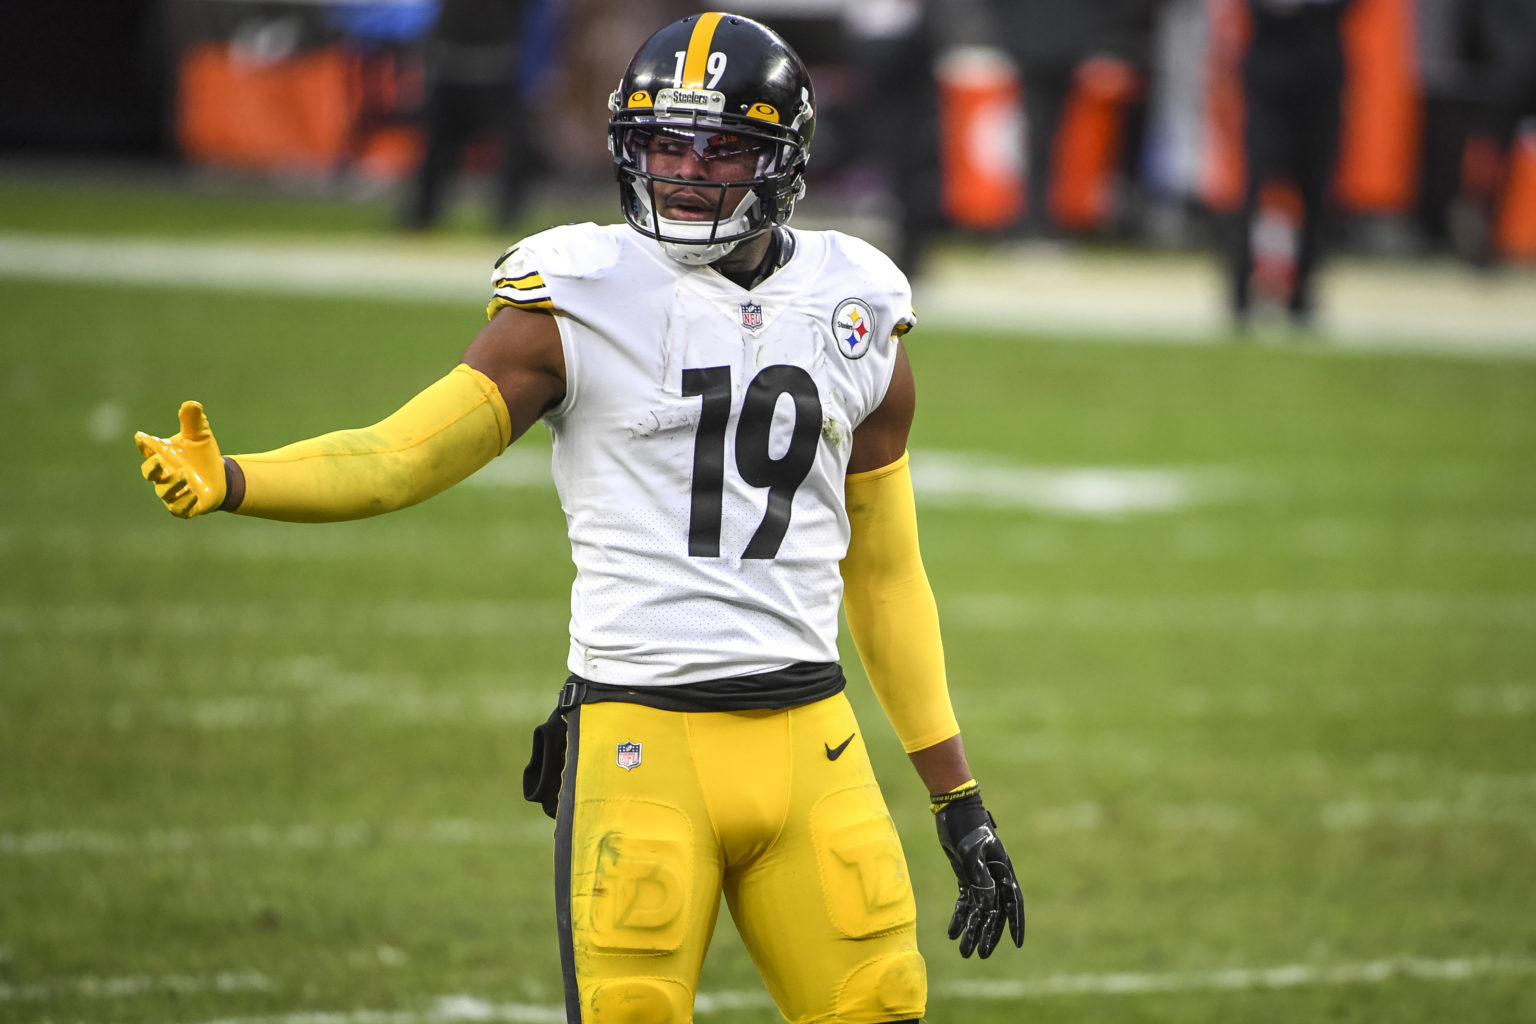 Top 3 Free Agent Destination for JuJu Smith-Schuster